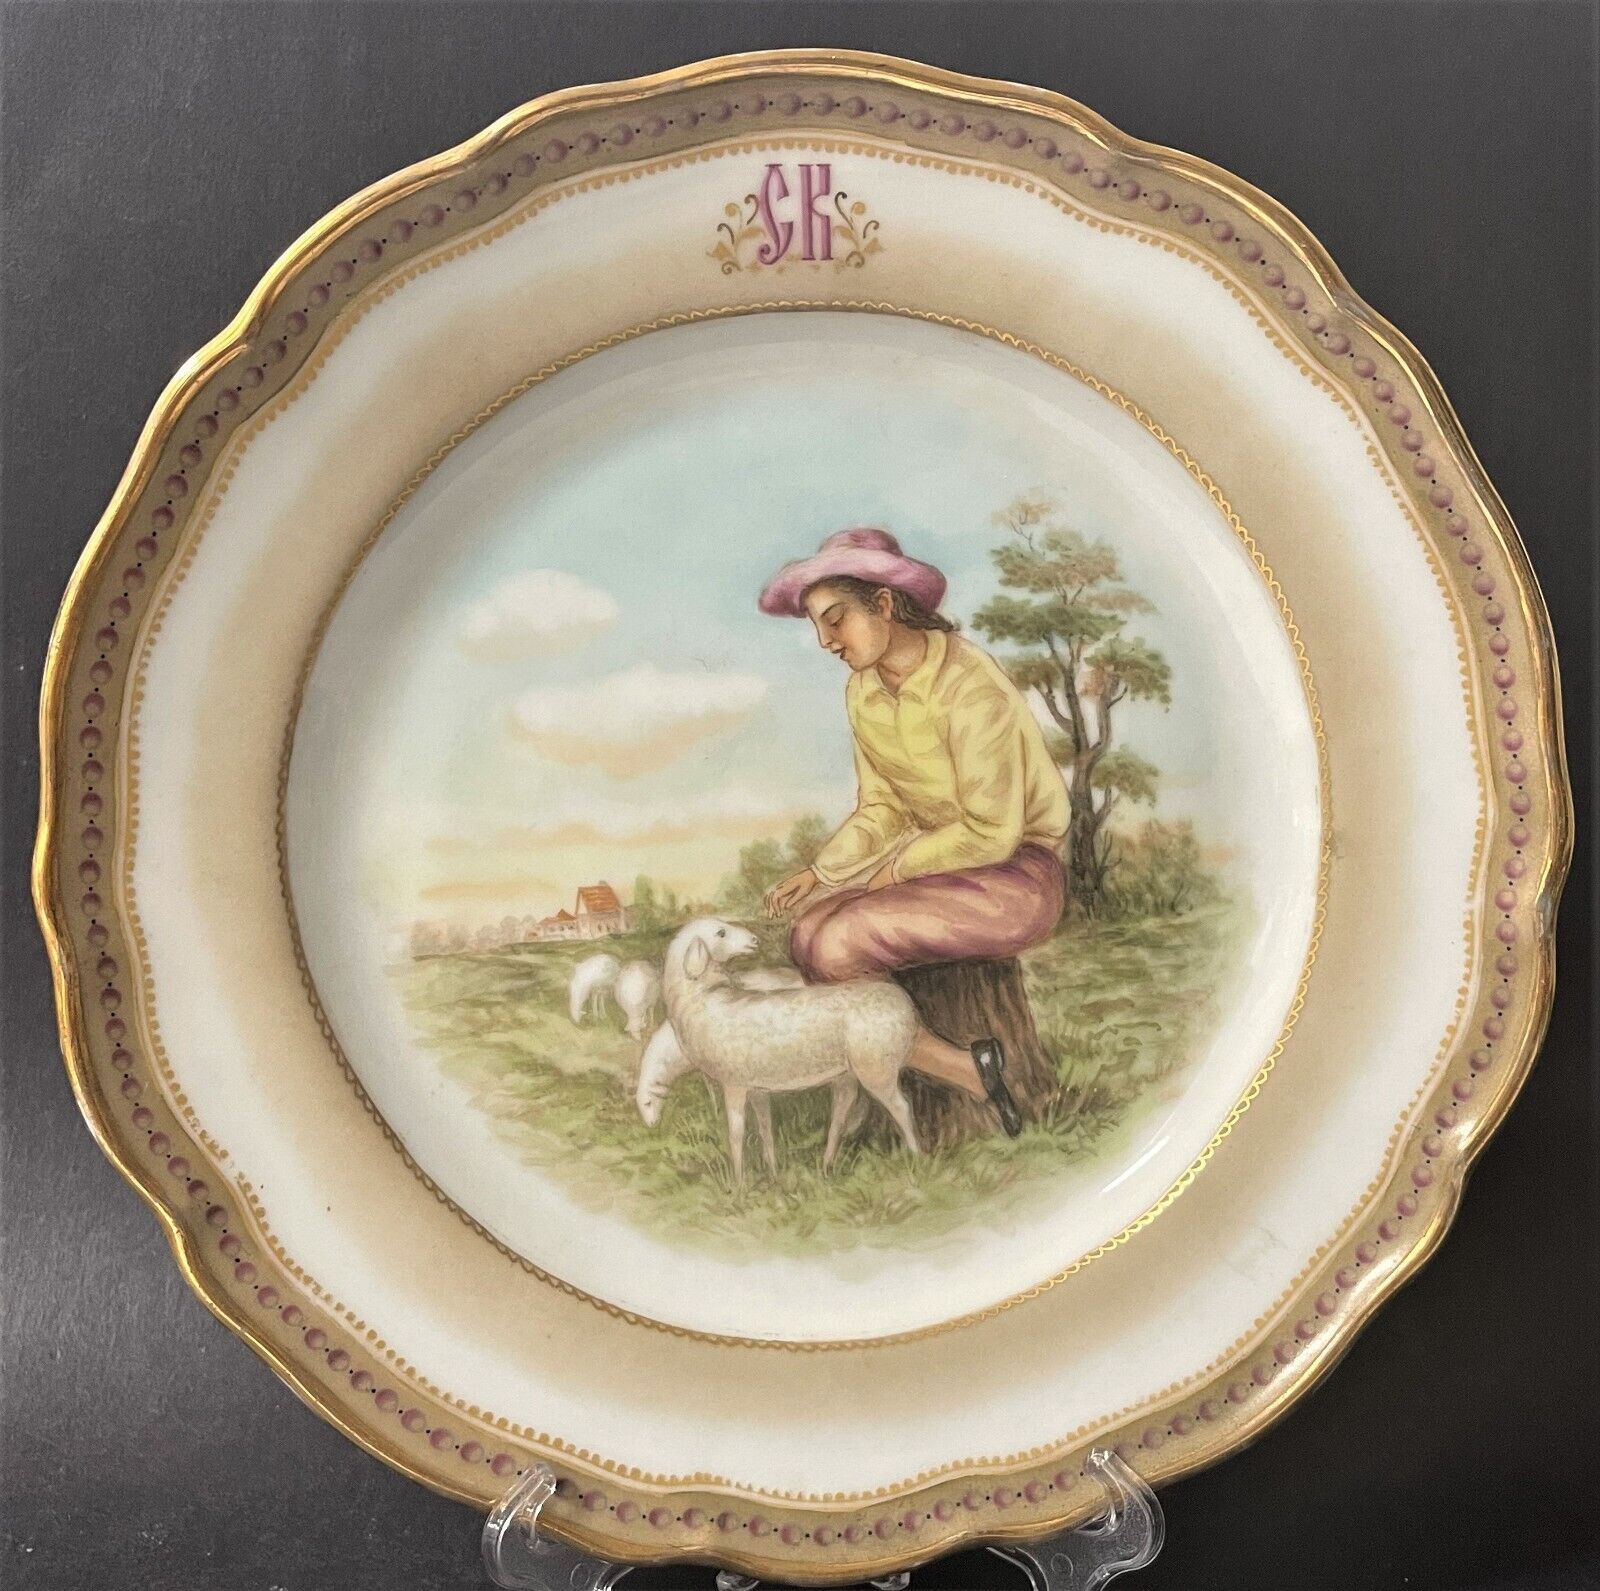 Rare Antique 19C Imperial Russian Kornilov Brothers Porcelain Plate